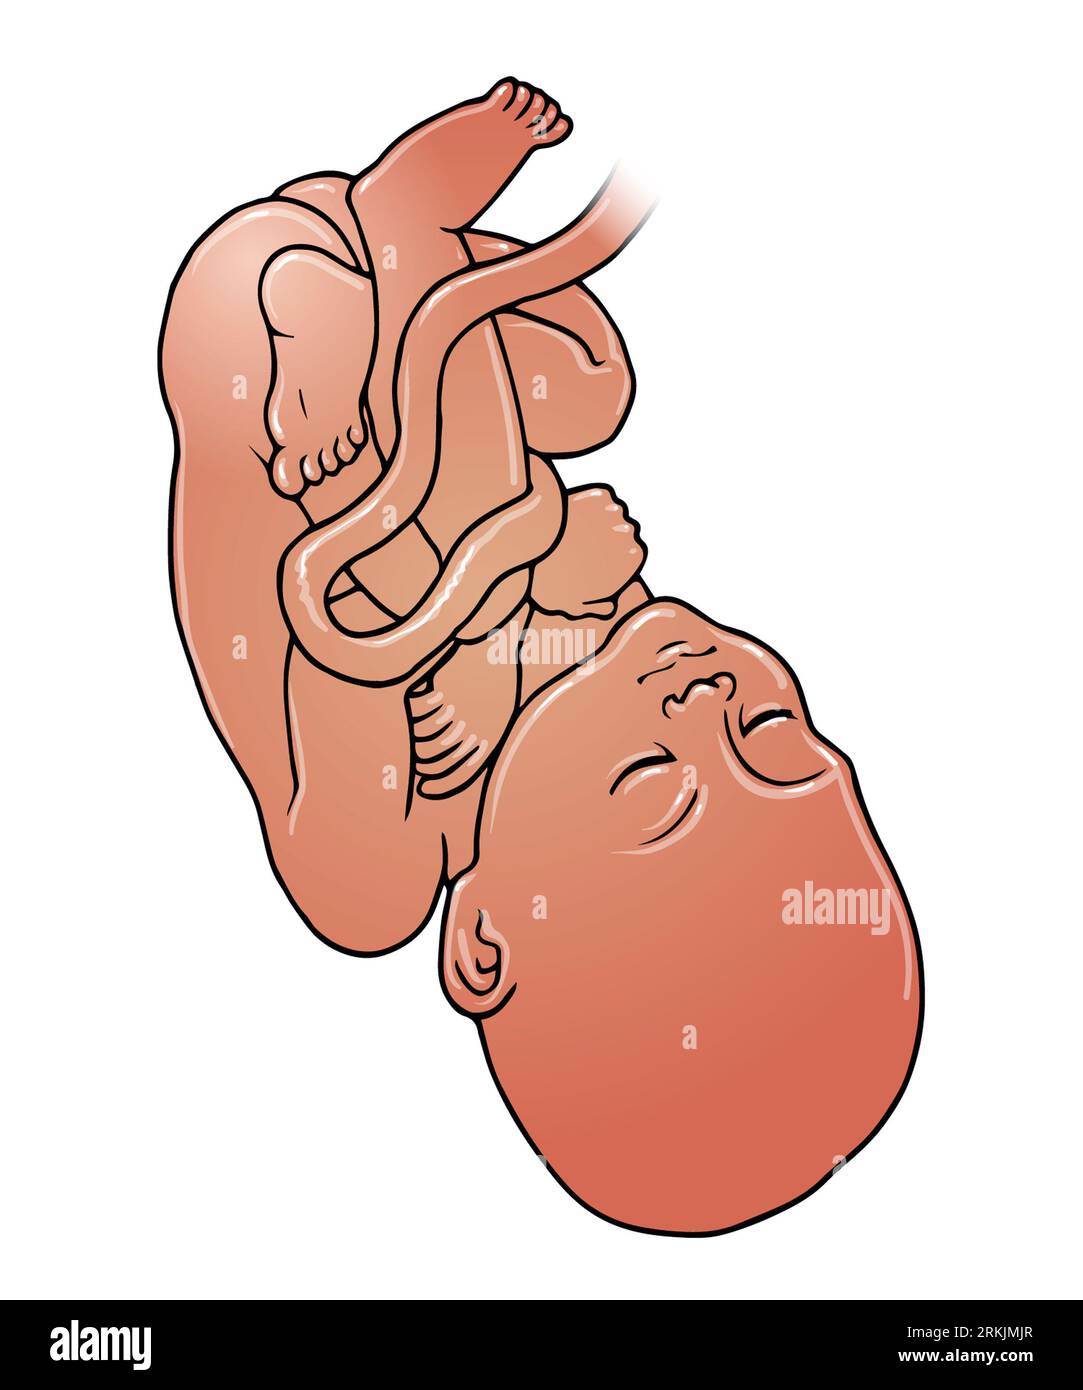 Art illustration of dark skinned foetus, baby in cephalic presentation delivery position, which can occur between 32-36 weeks, pregnancy, child birth Stock Photo